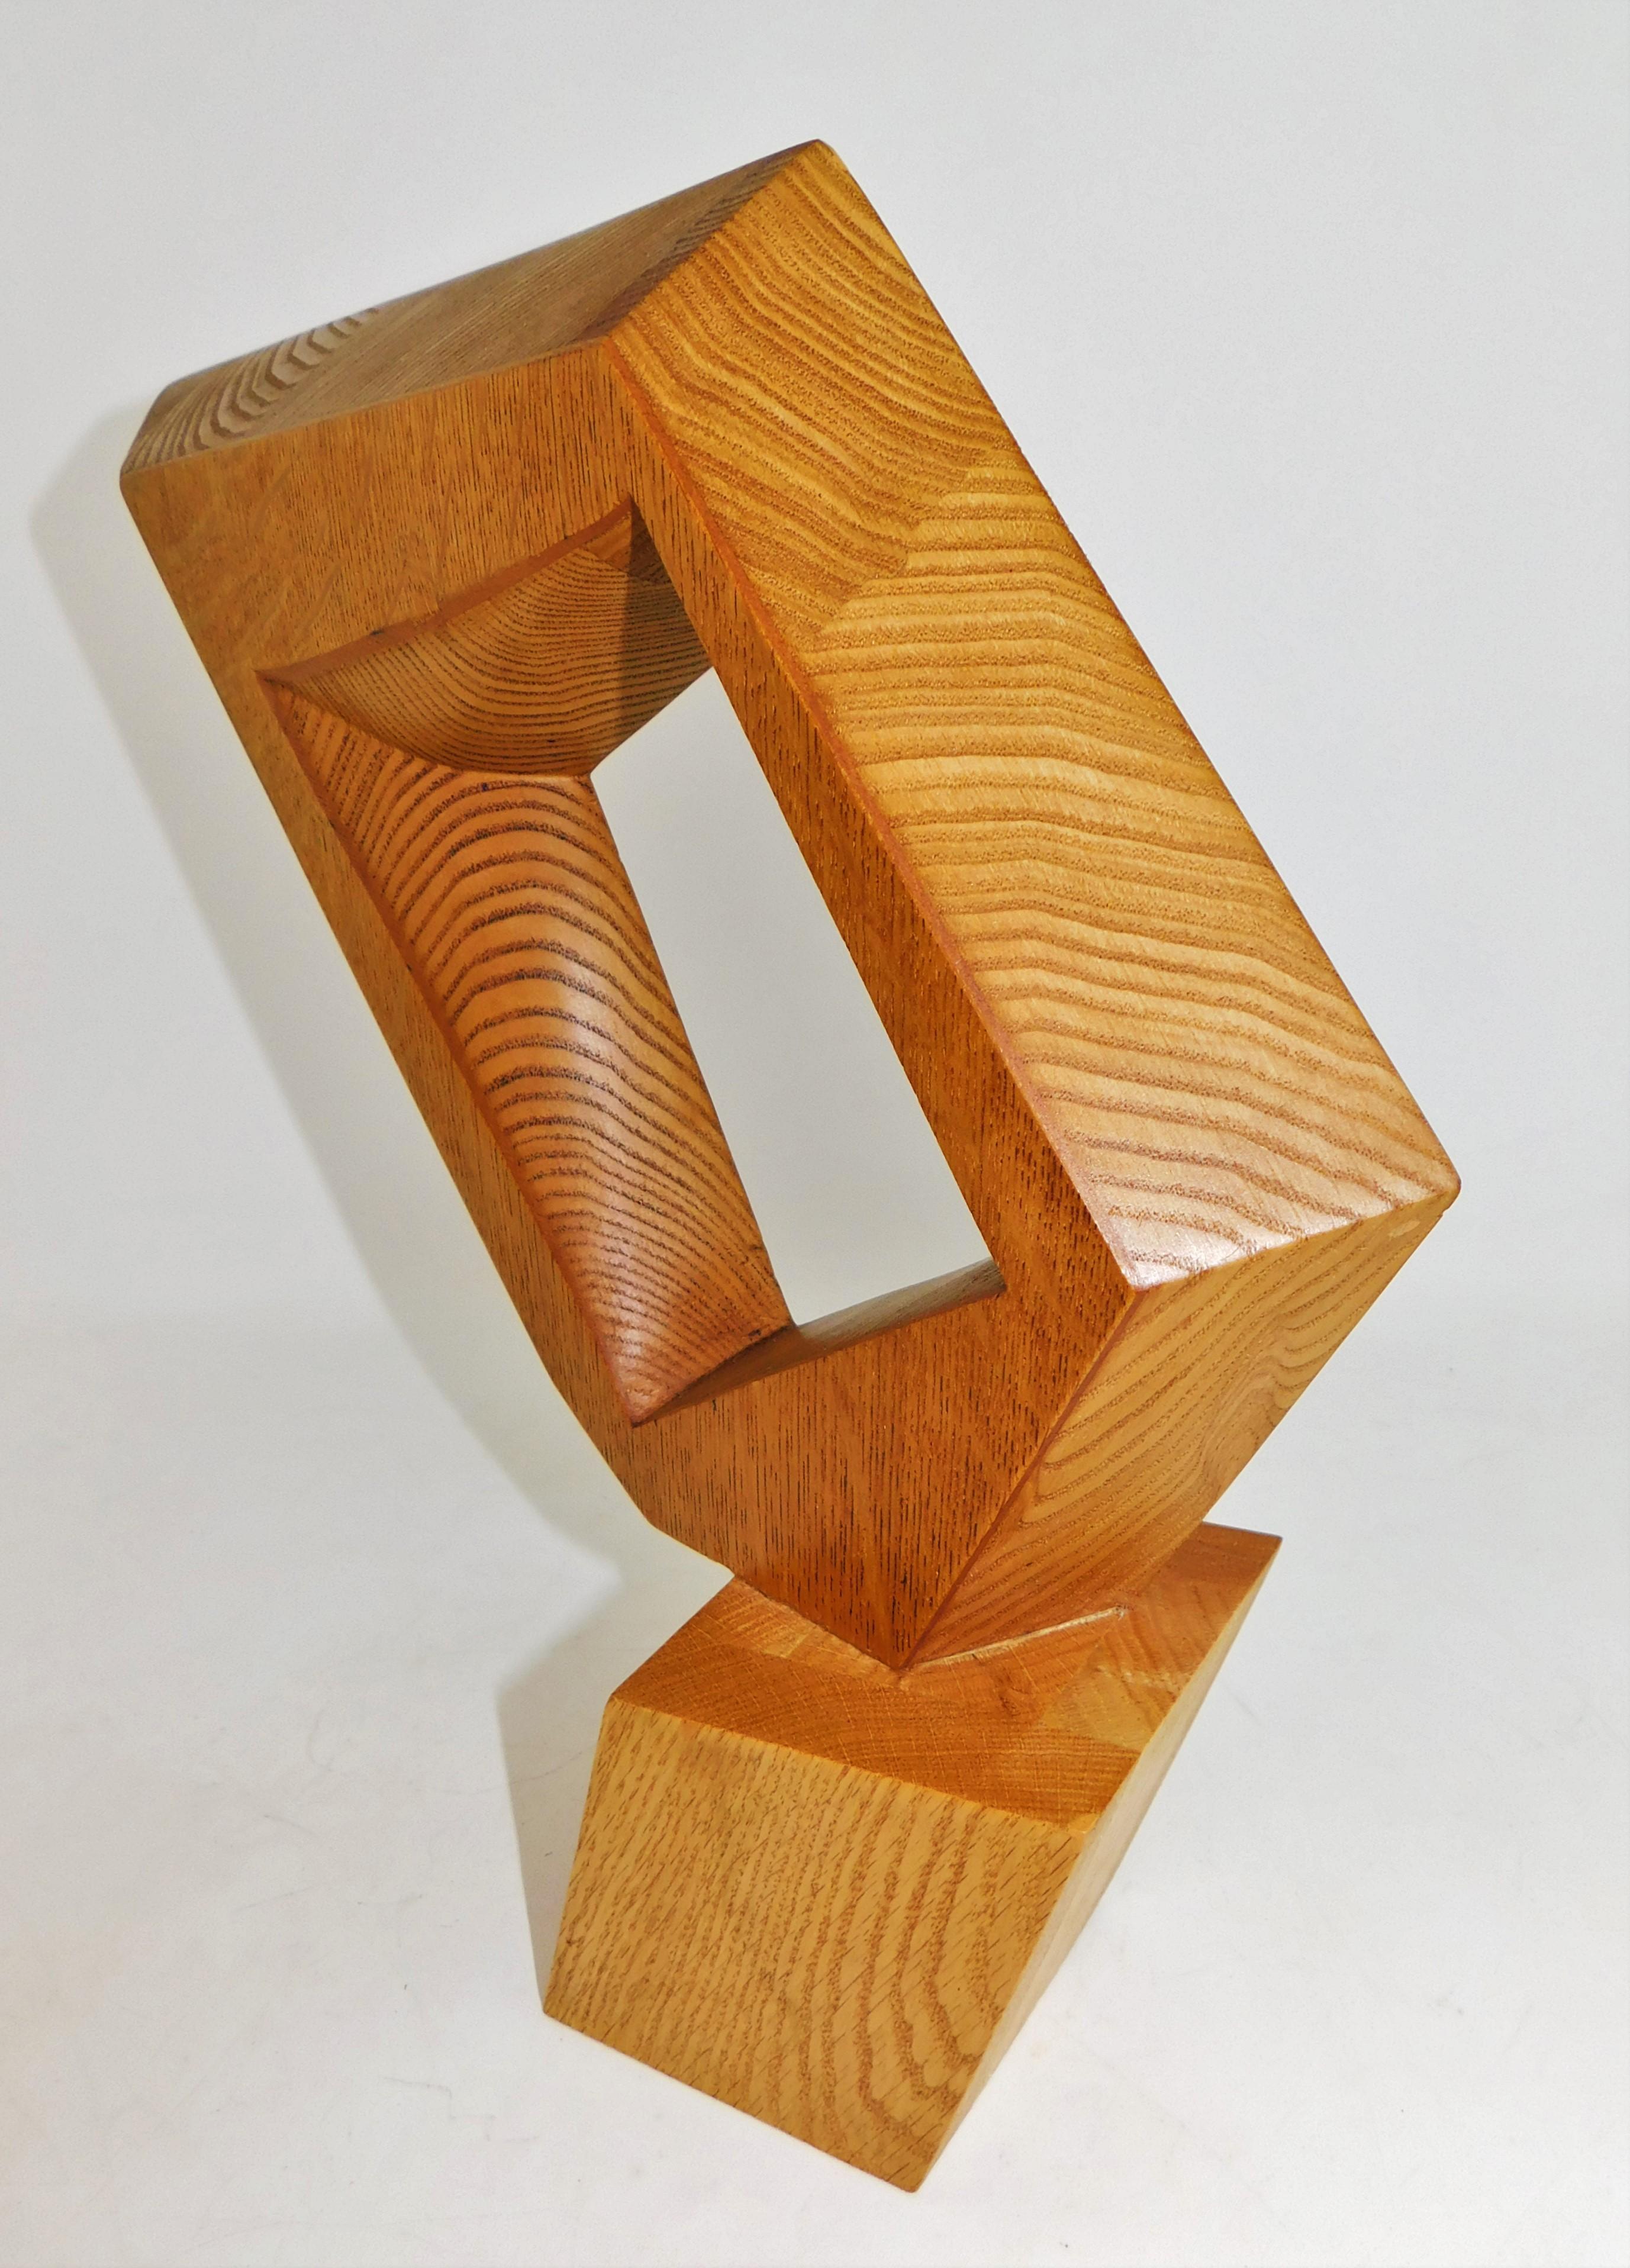 Canadian Signed Modern Abstract Constructivist Styled Wooden Oak Sculpture For Sale